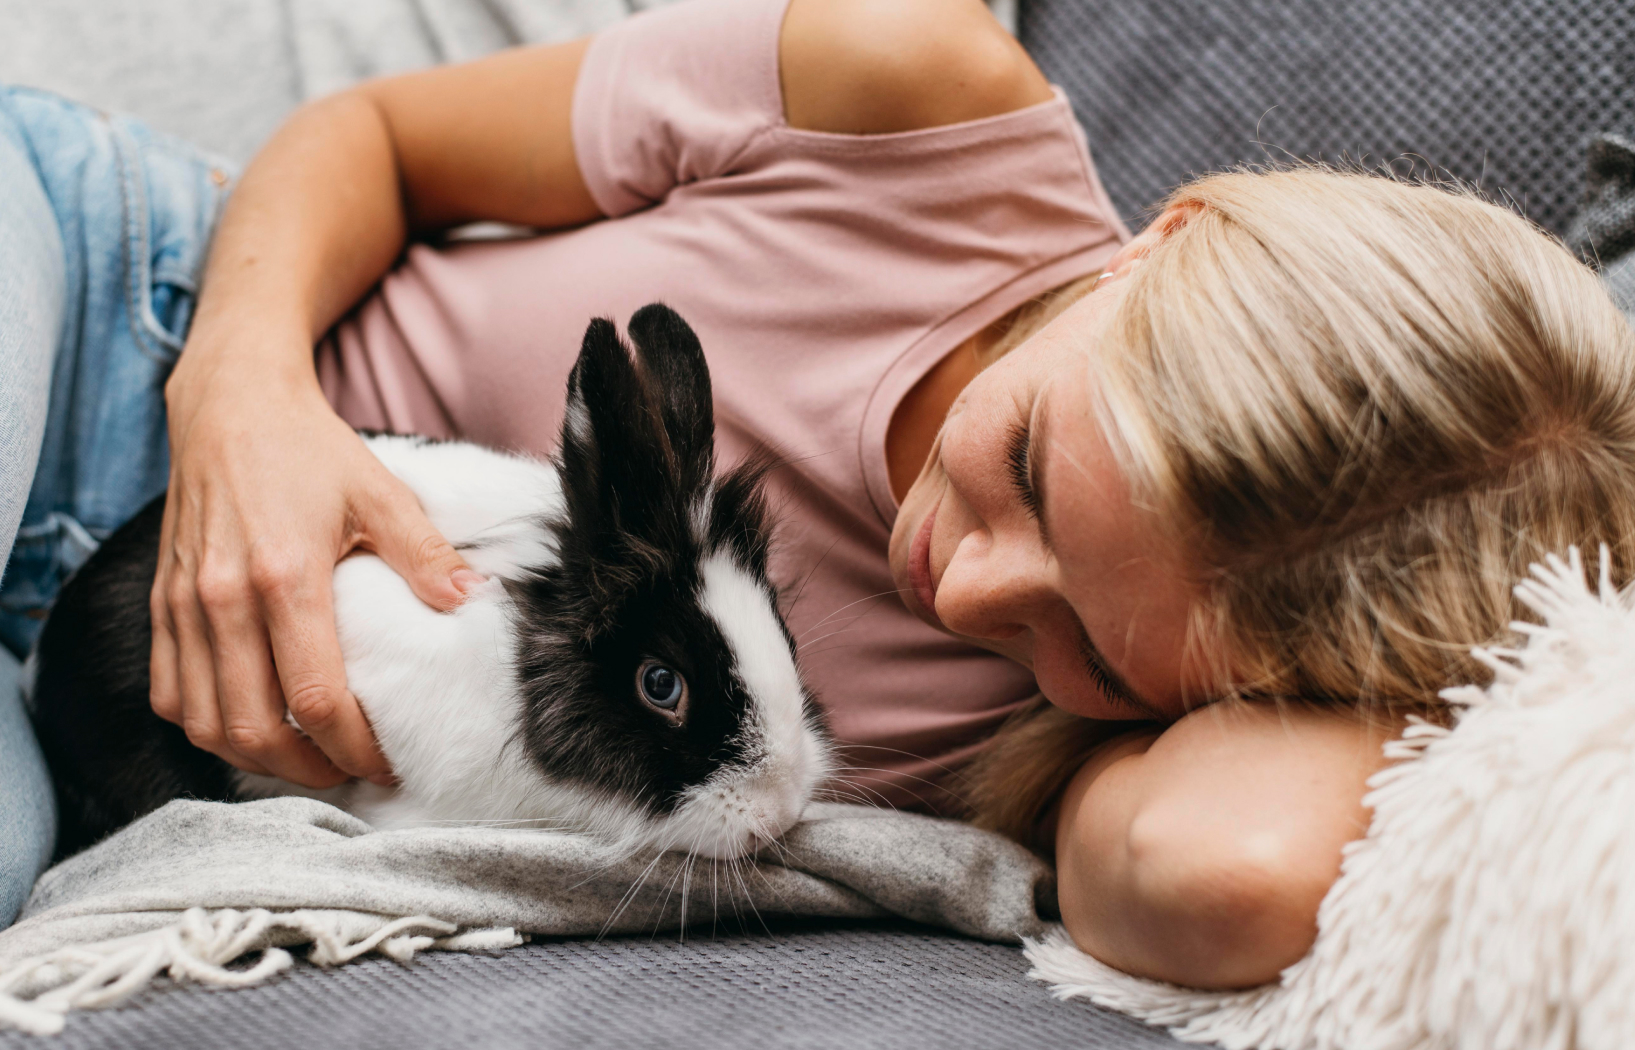 Girl Laying In Bed with Rabbit